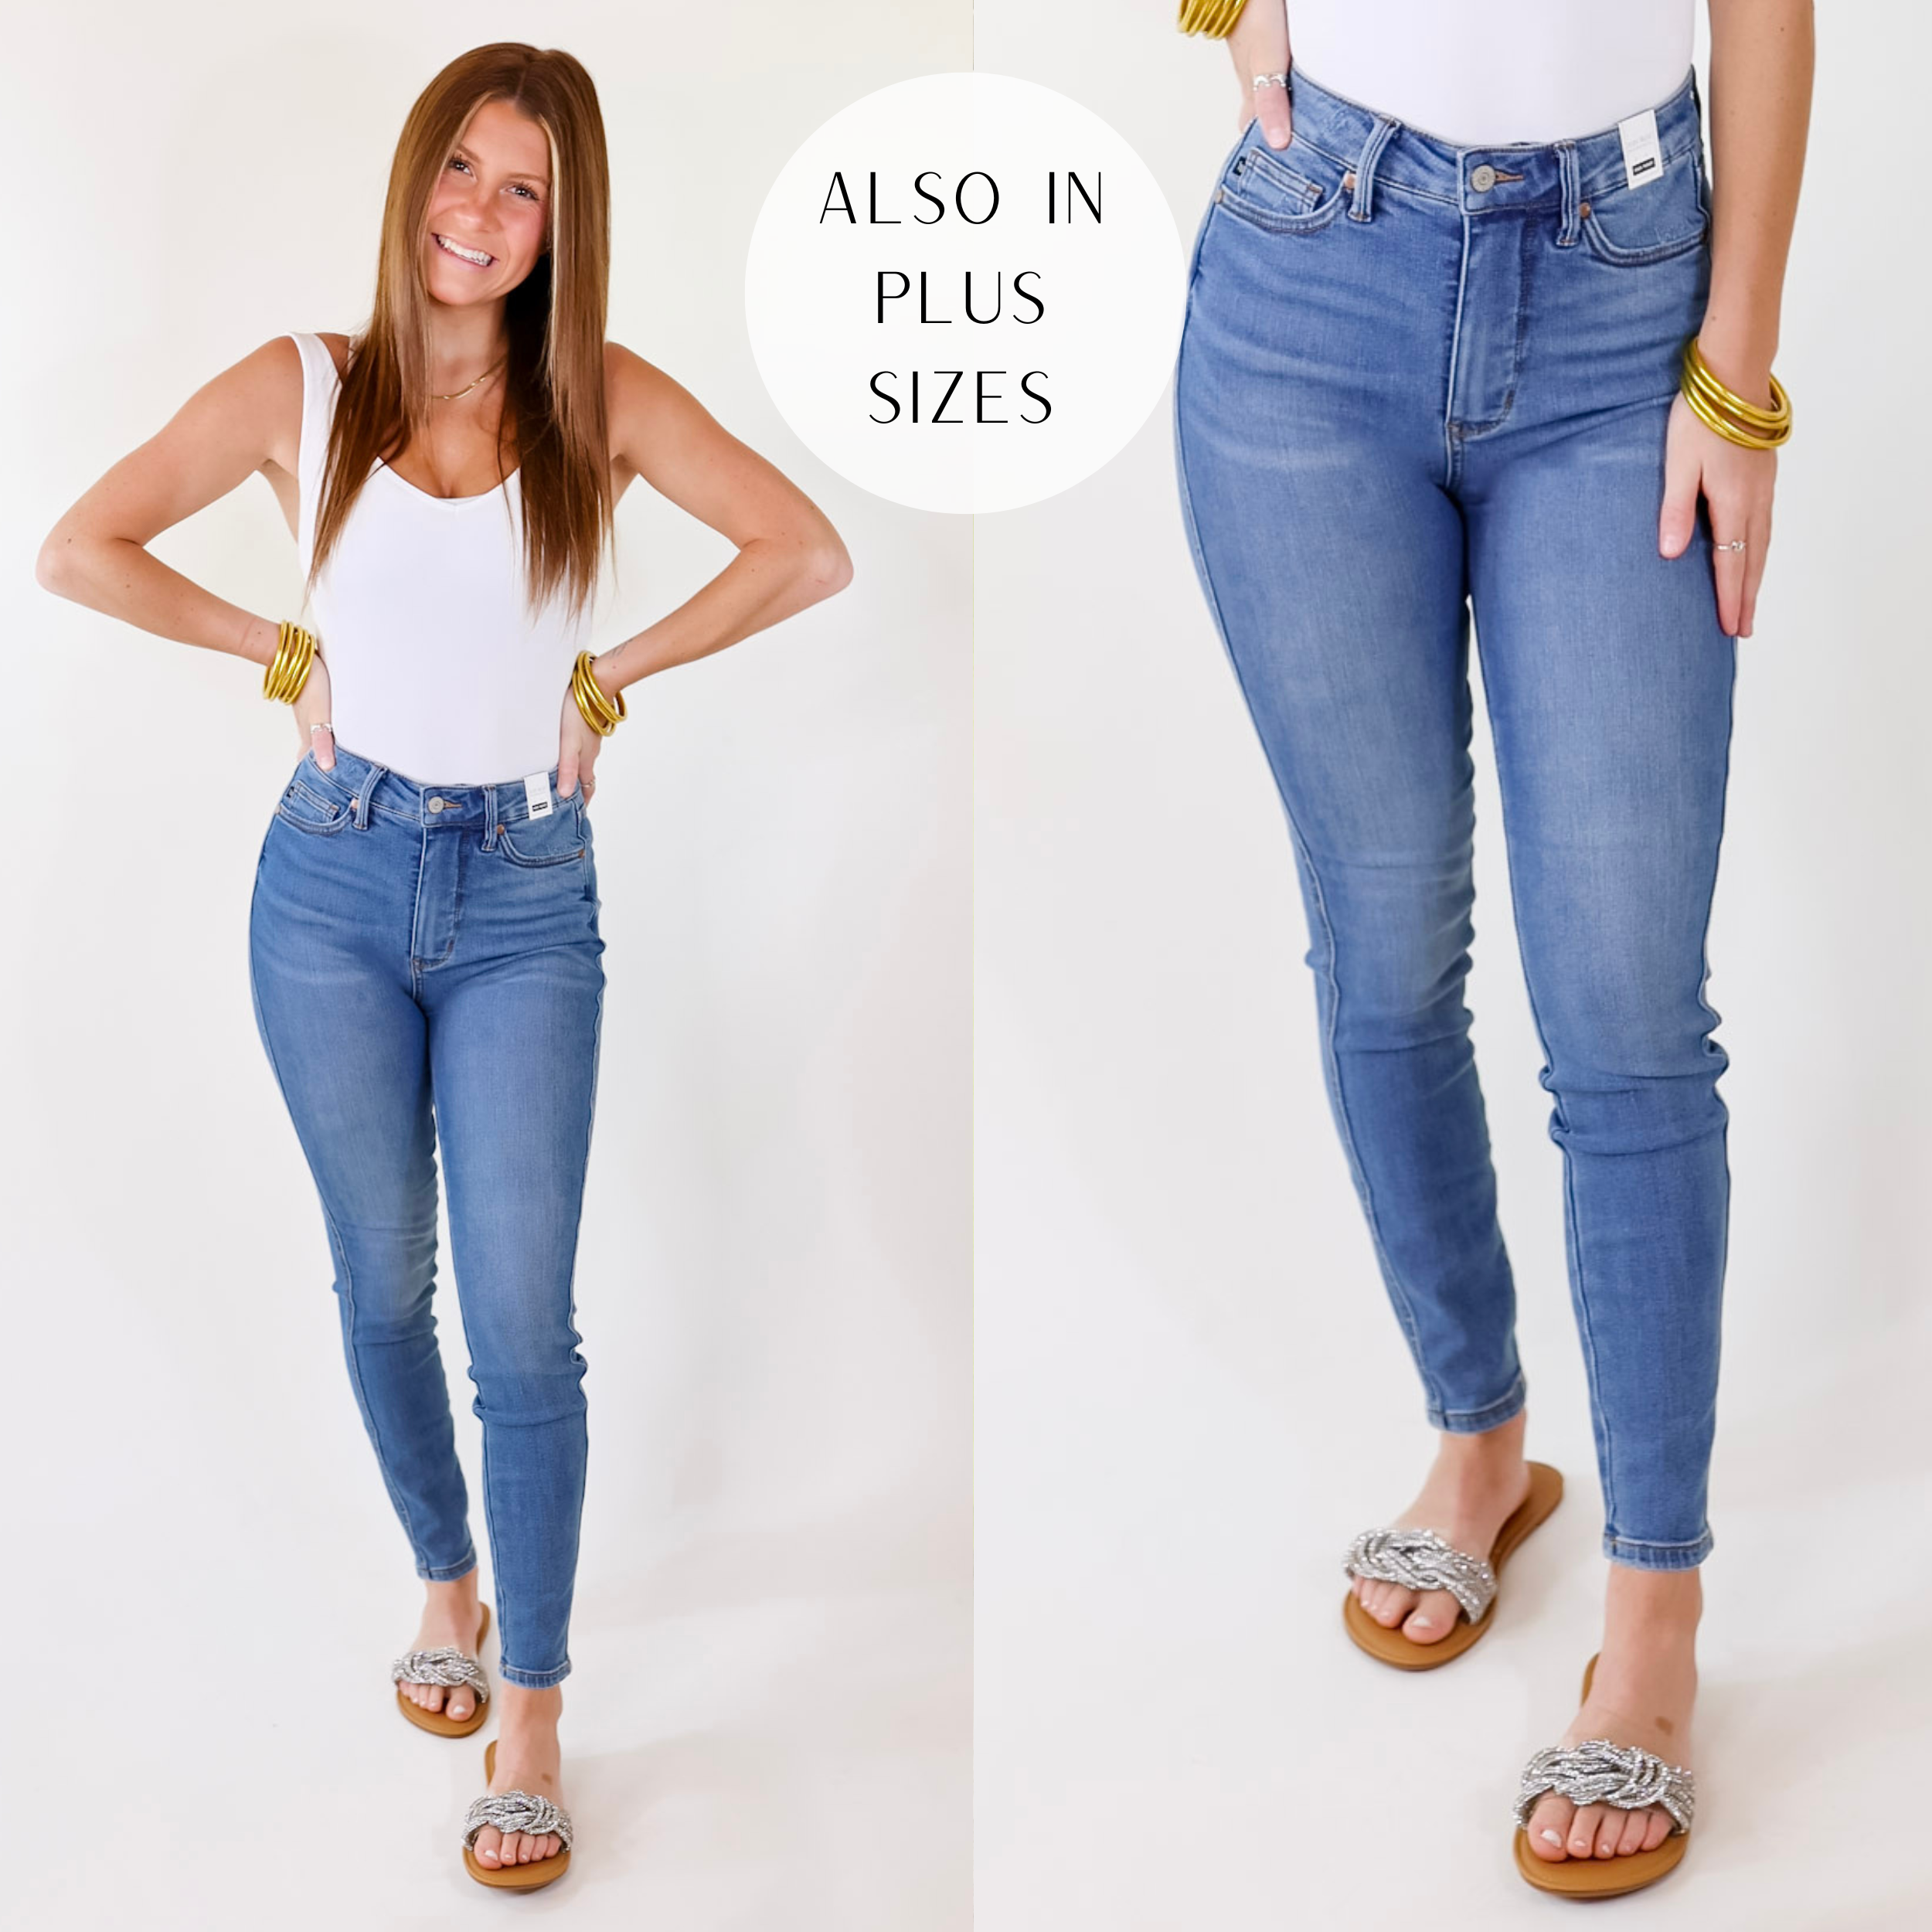 Model is wearing a pair of high waist skinny jeans in a medium wash. Model has these jeans paired with a white tank top, crystal sandals, and gold tone jewelry.